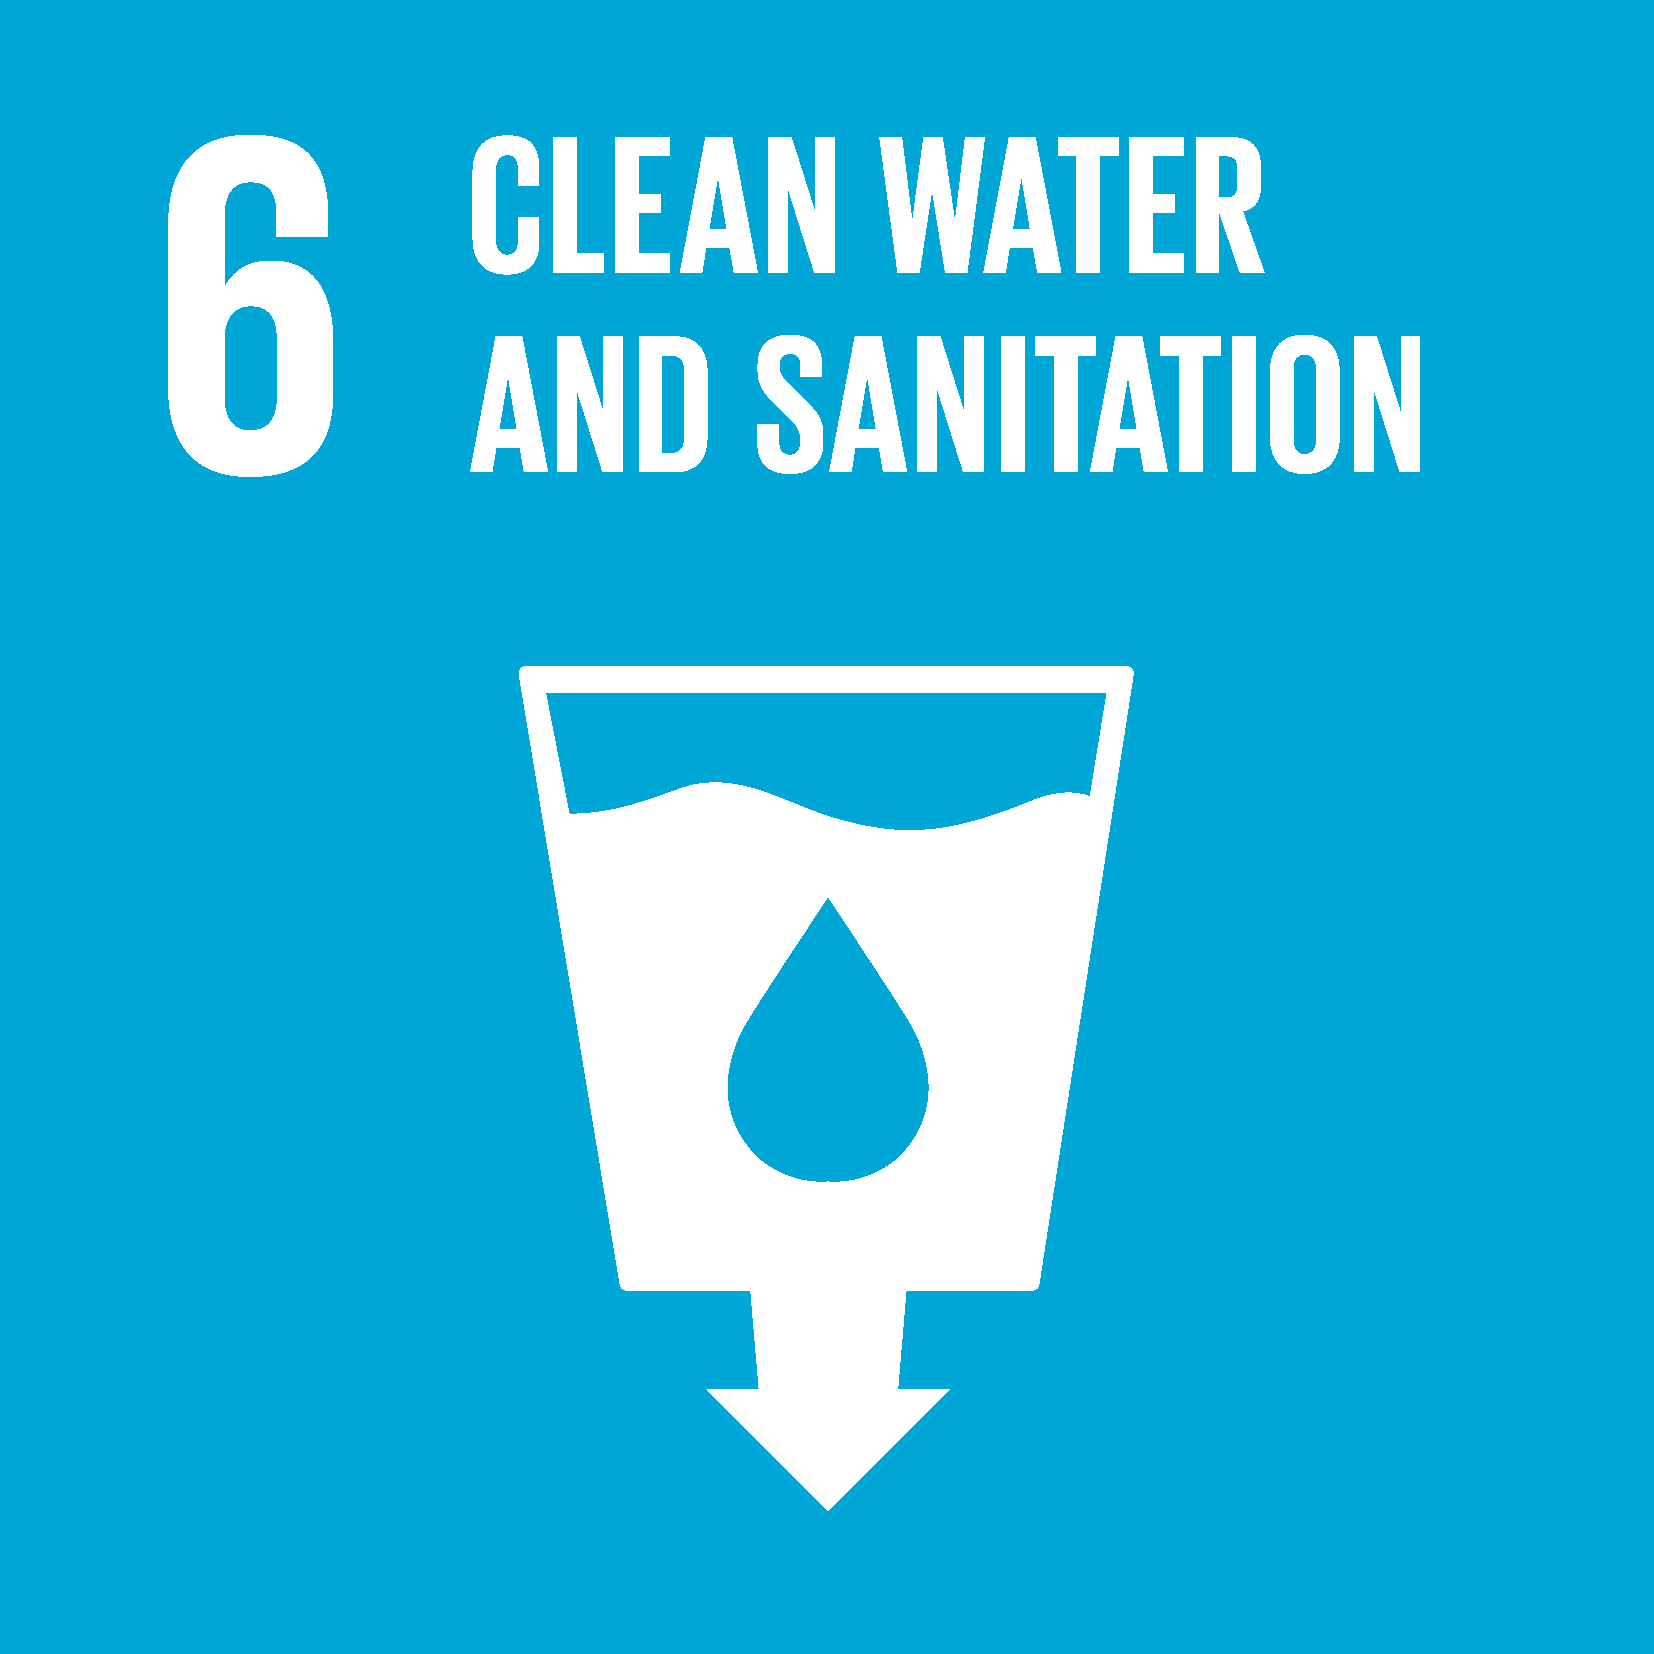 The Global Goal 6 Clean water and sanitation